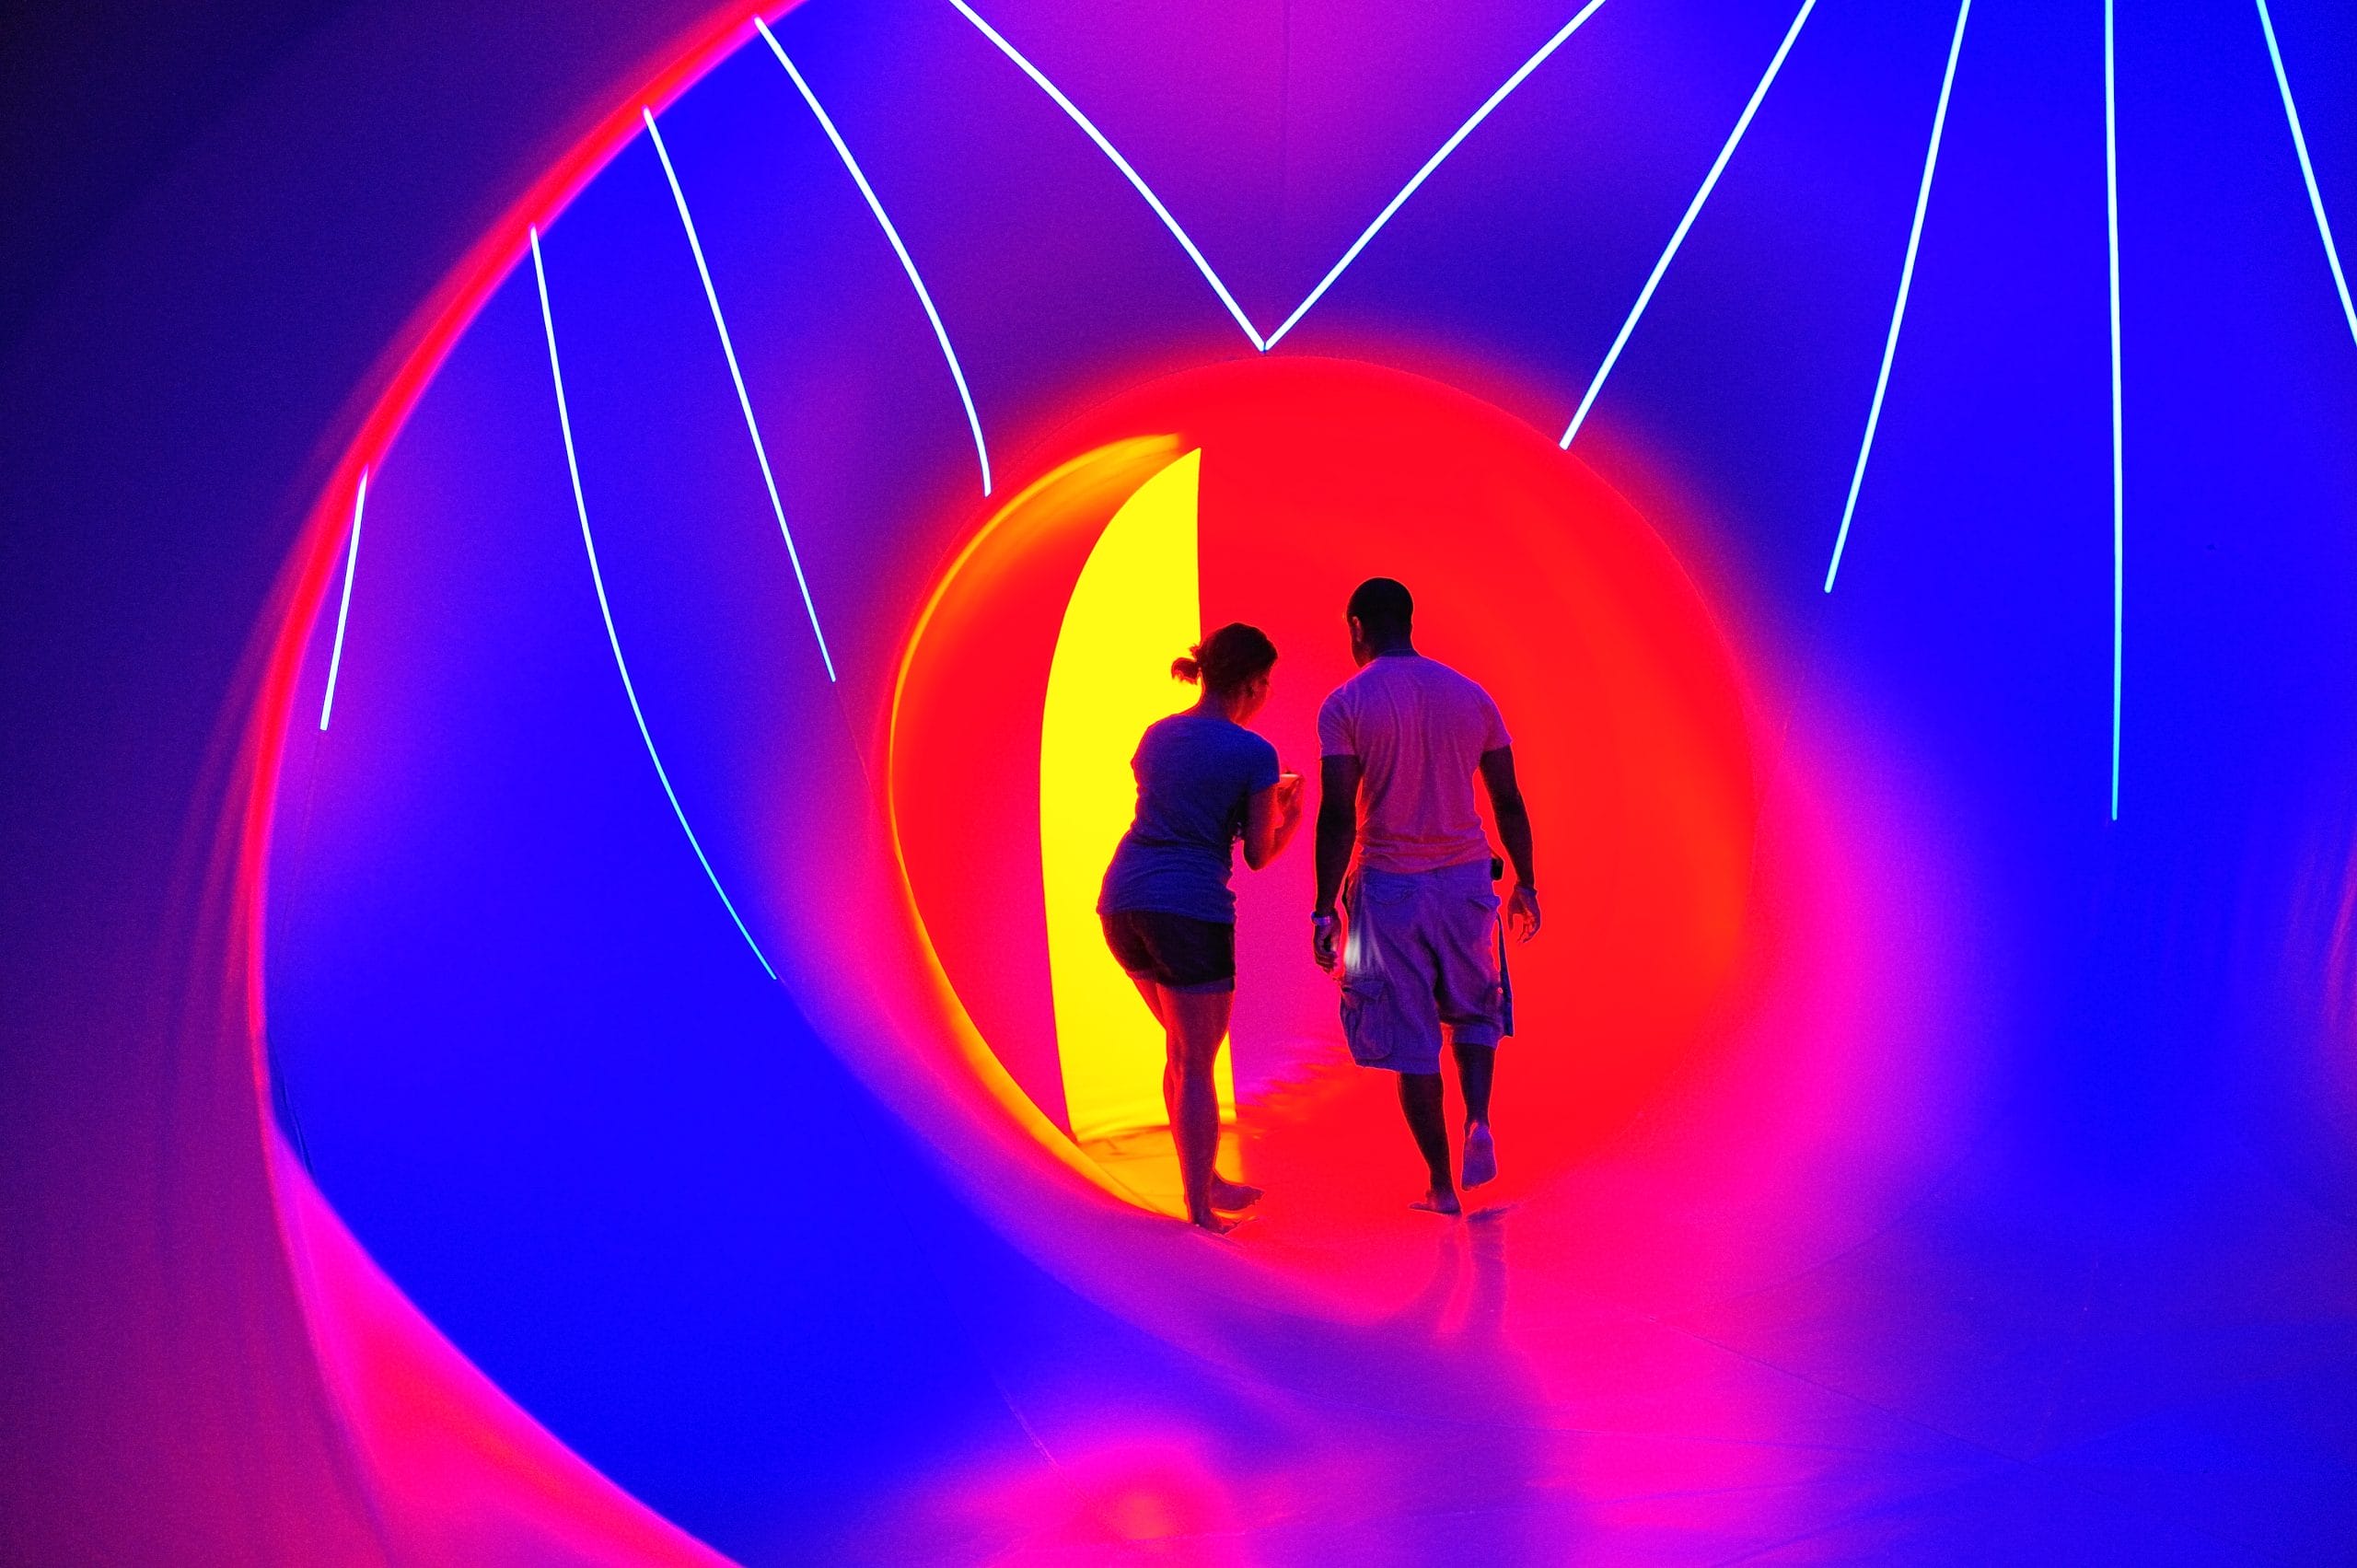 A man and woman looking away from the camera inside a small section of a luminairum, which is glowing red and yellow. They are surrounded by larger blue section with light blue lines.